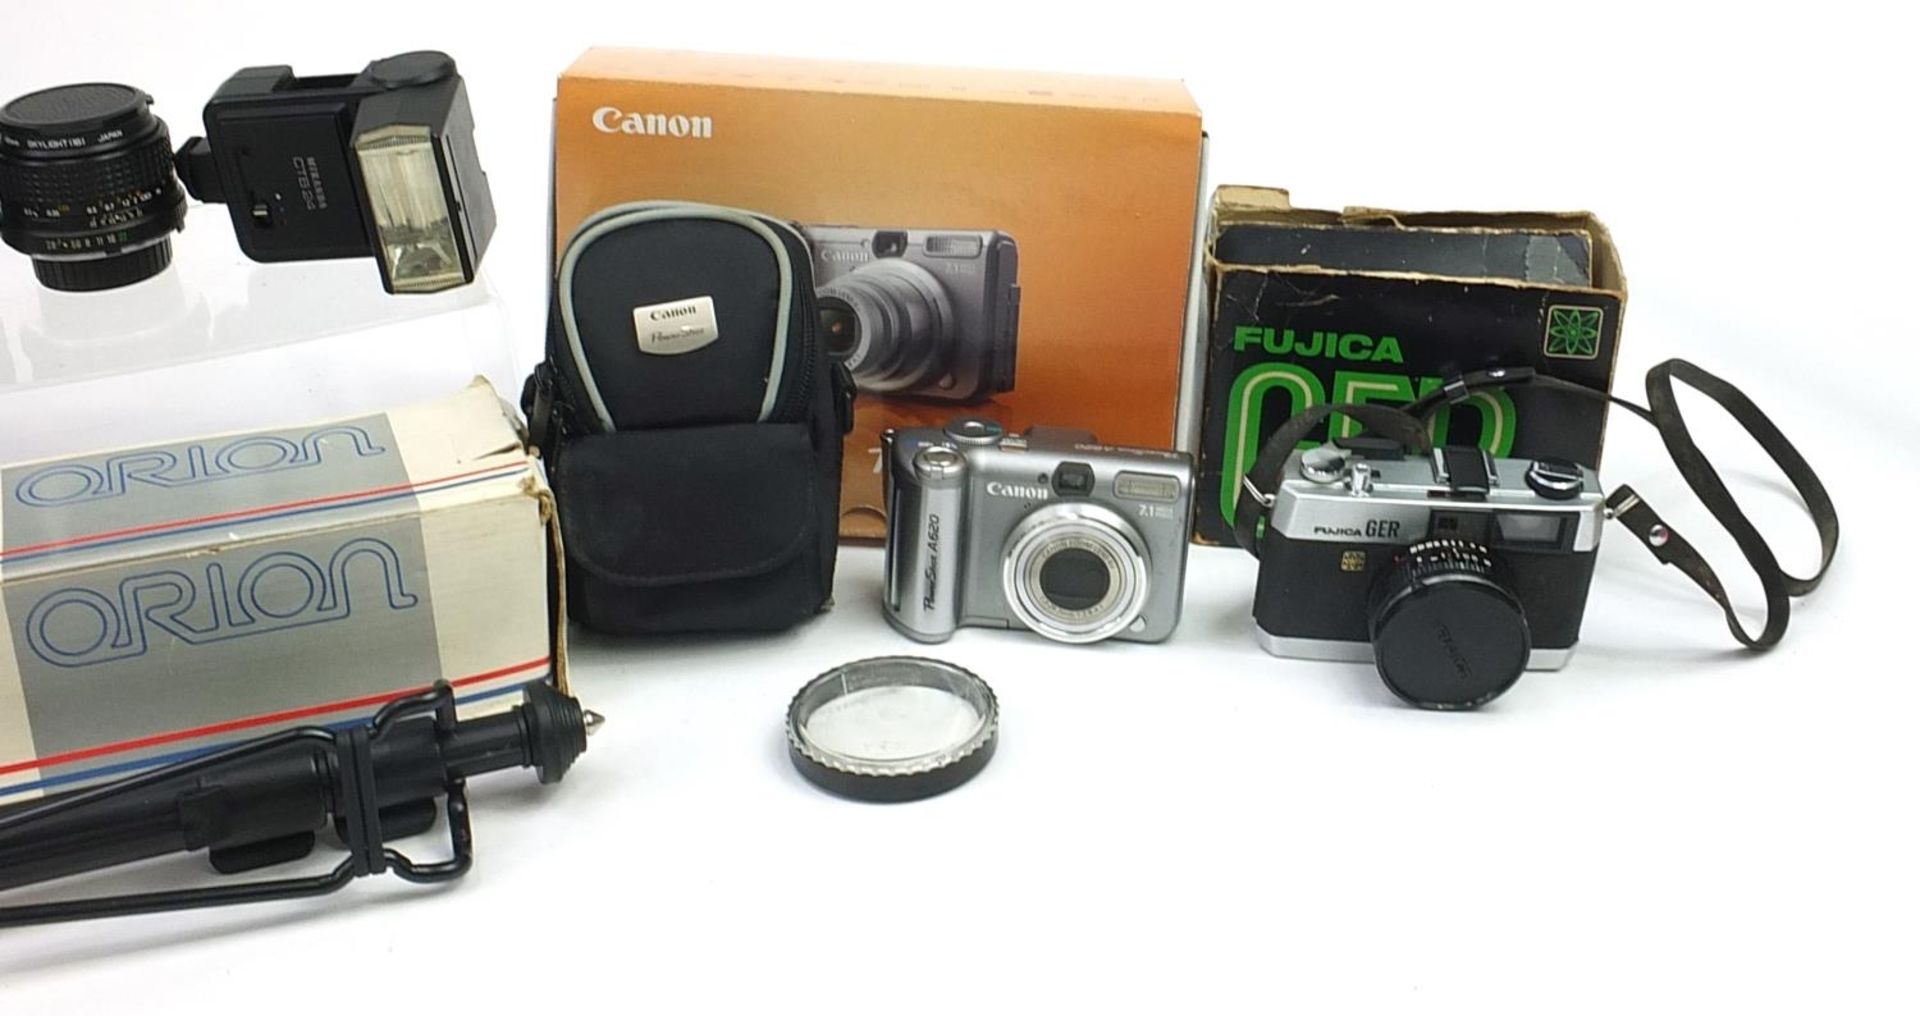 Vintage and later cameras, lenses and accessories including Minolta X-9, Minolta X-300 and Canon - Image 4 of 4